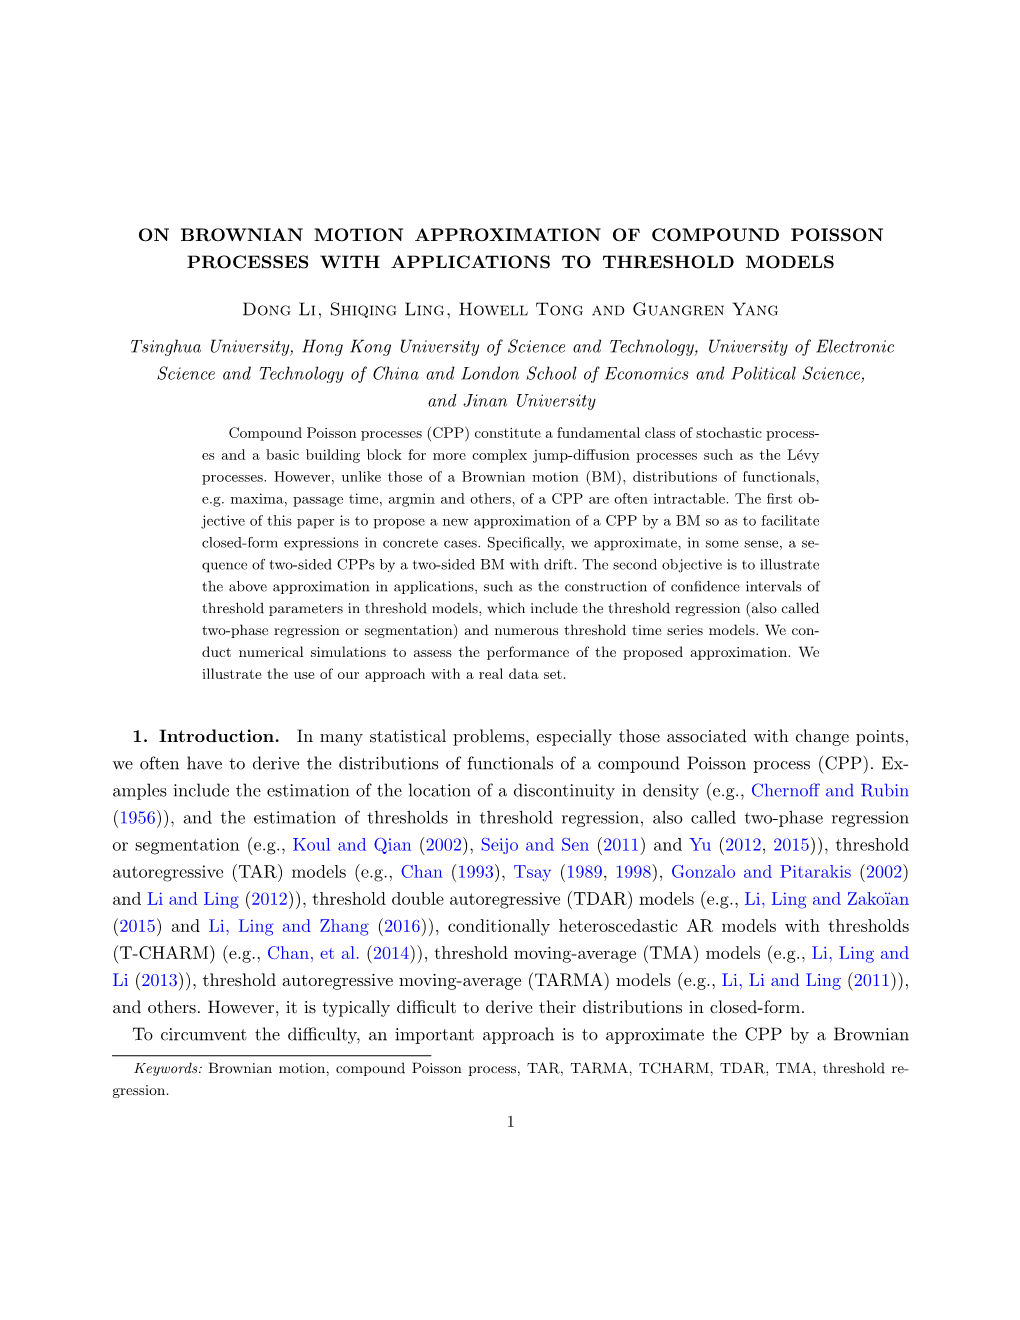 On Brownian Motion Approximation of Compound Poisson Processes with Applications to Threshold Models